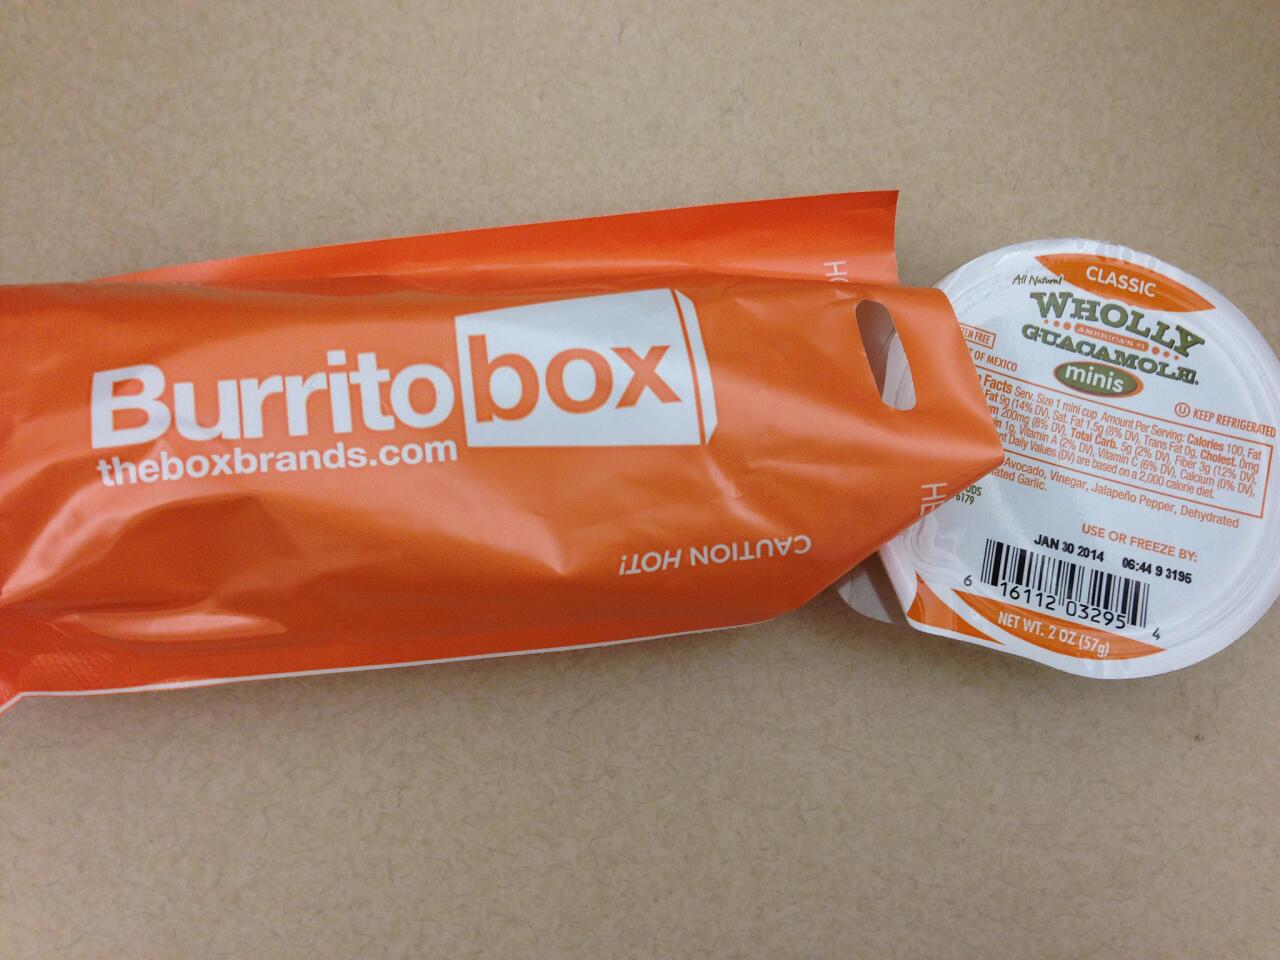 The $3 burritos come wrapped in paper inside orange bags. A side of guacamole costs extra.